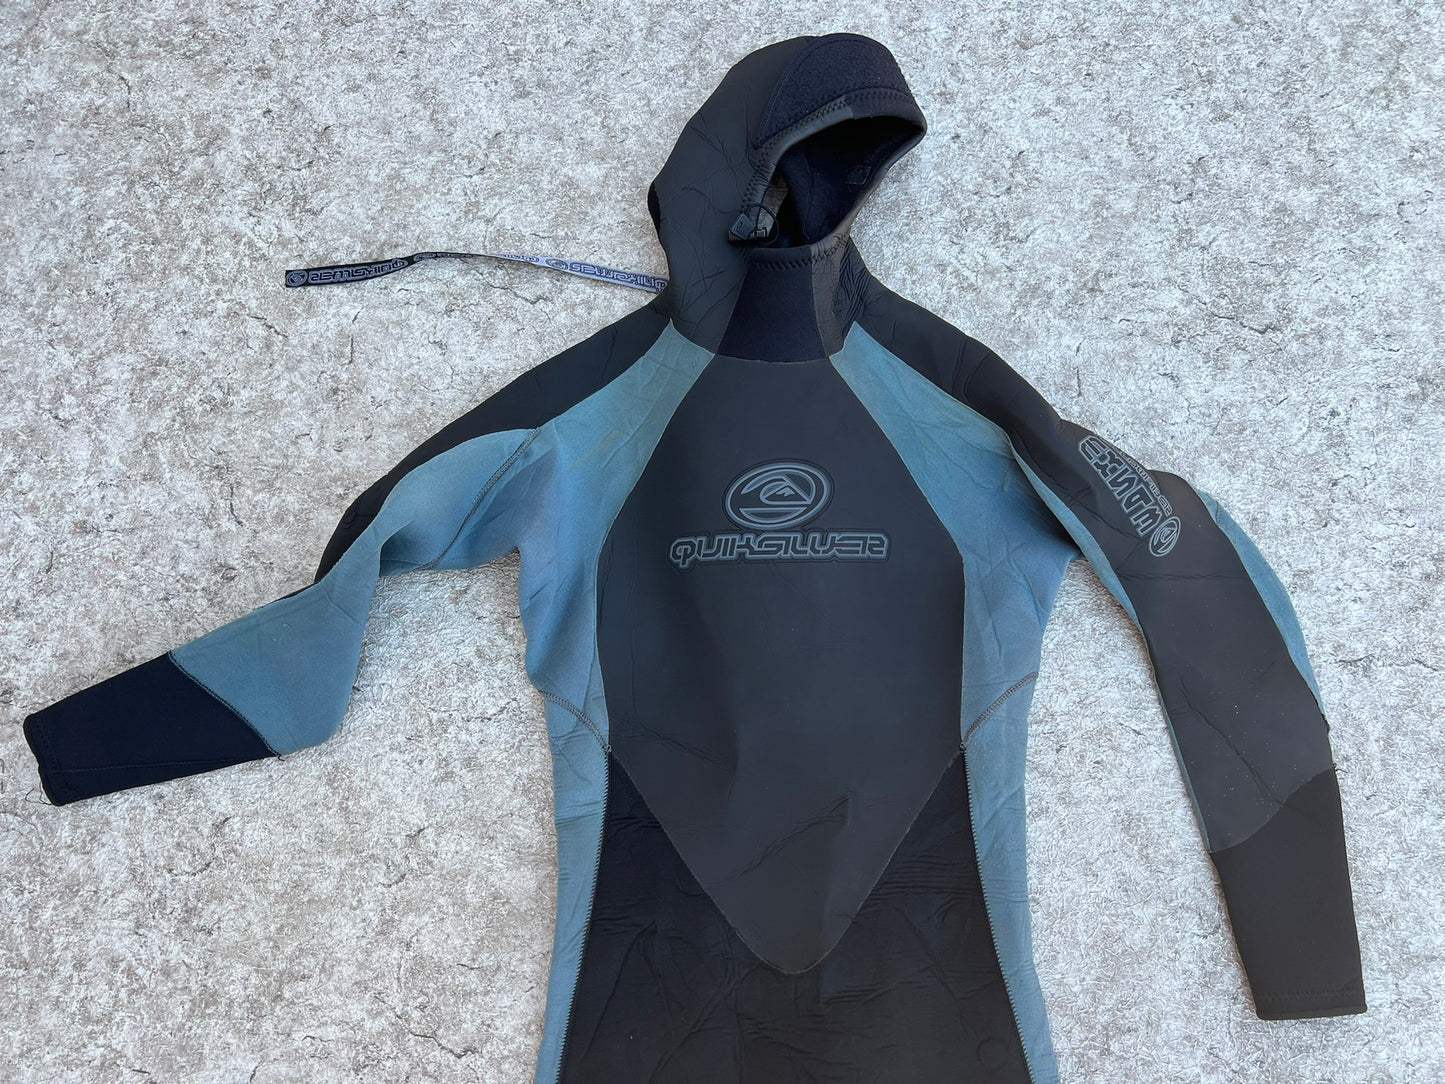 Wetsuit Child Size Youth  12-14 QuickSilver 4-5 mm Black Blue With Hood Some Wear and Pilling Still Works Great For The Surf